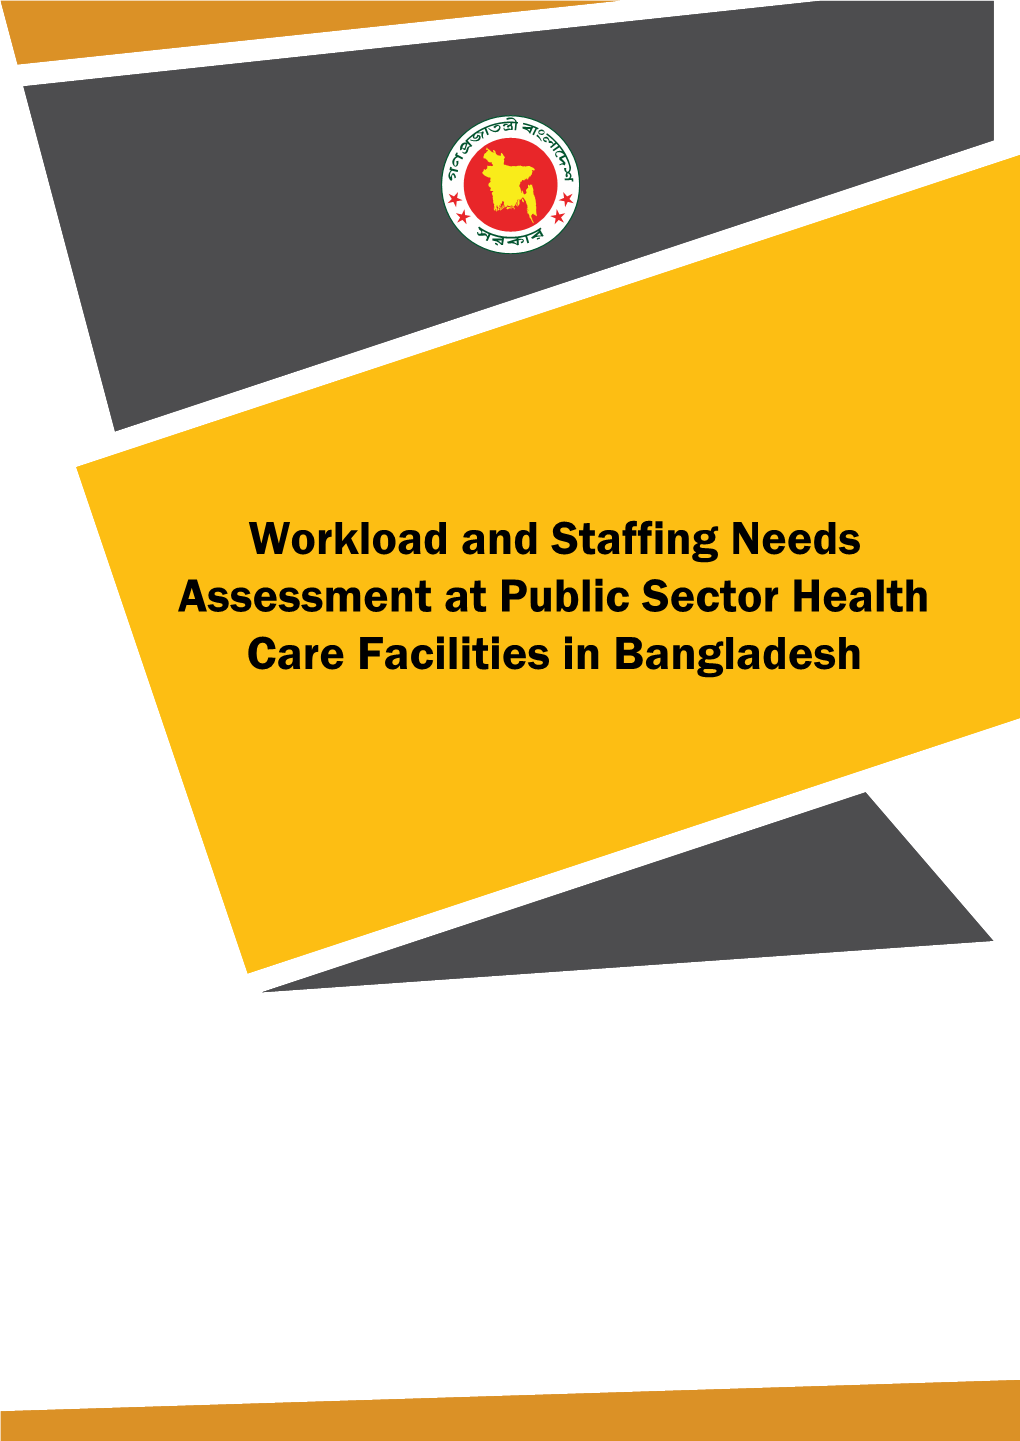 Workload and Staffing Needs Assessment at Public Sector Health Care Facilities in Bangladesh